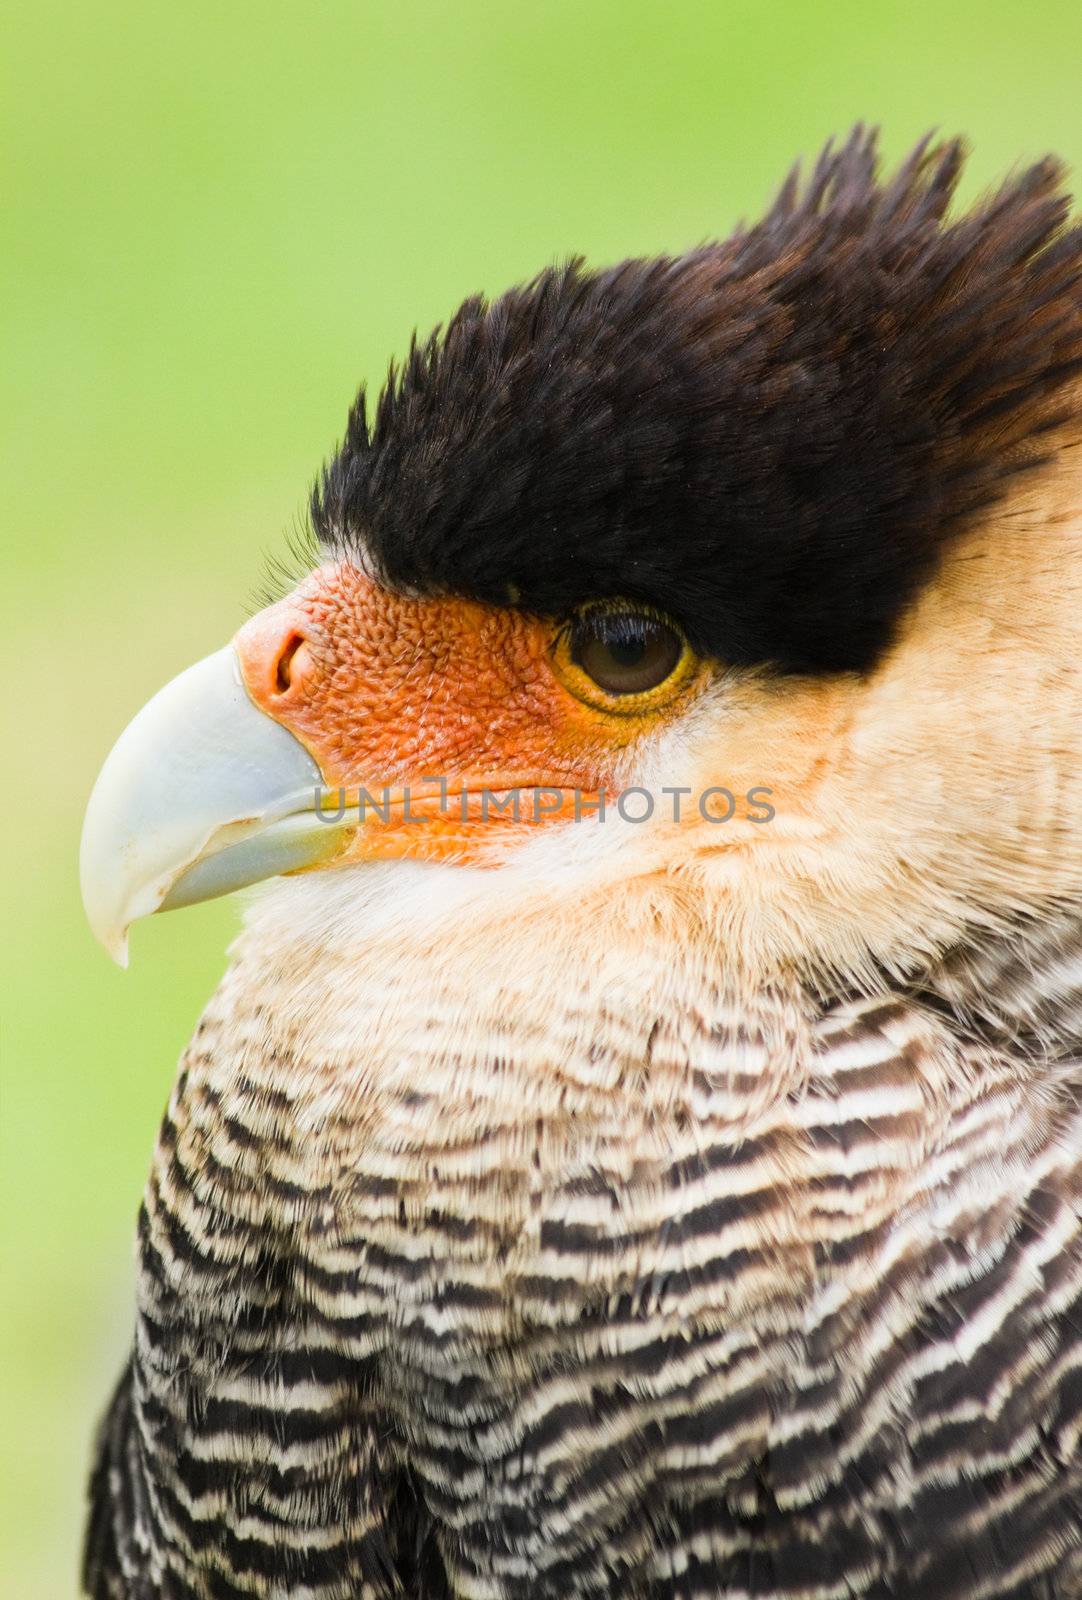 Southern crested Caracara in side angle view